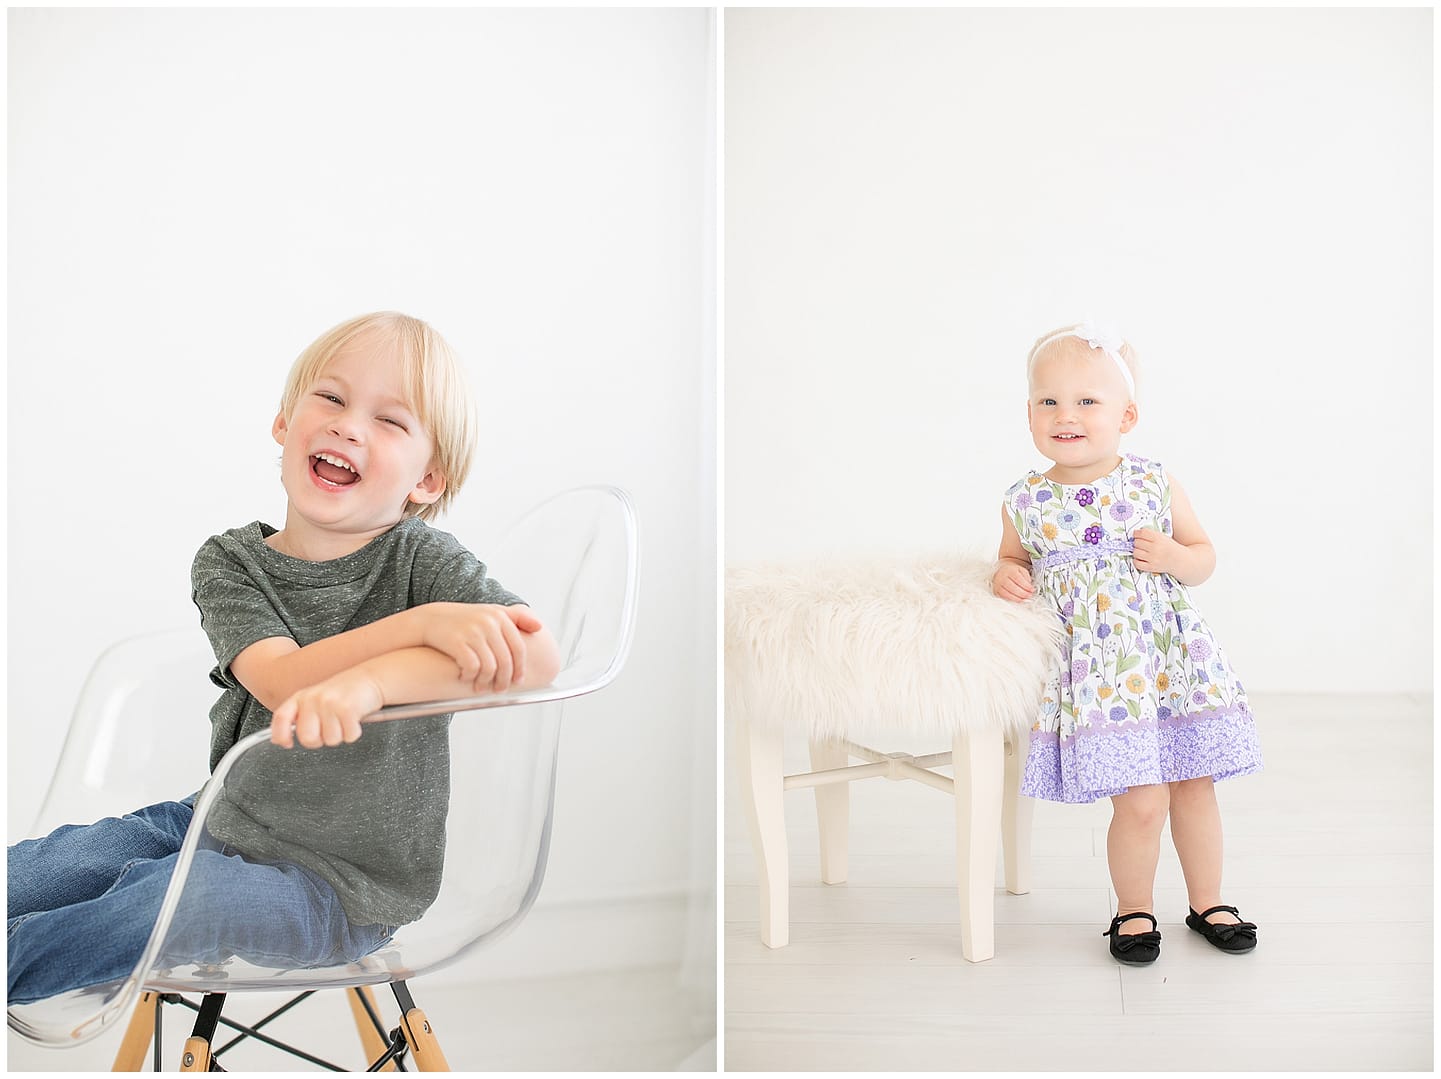 Siblings pose for portraits in studio. Photos by Tiffany Hix Photography.